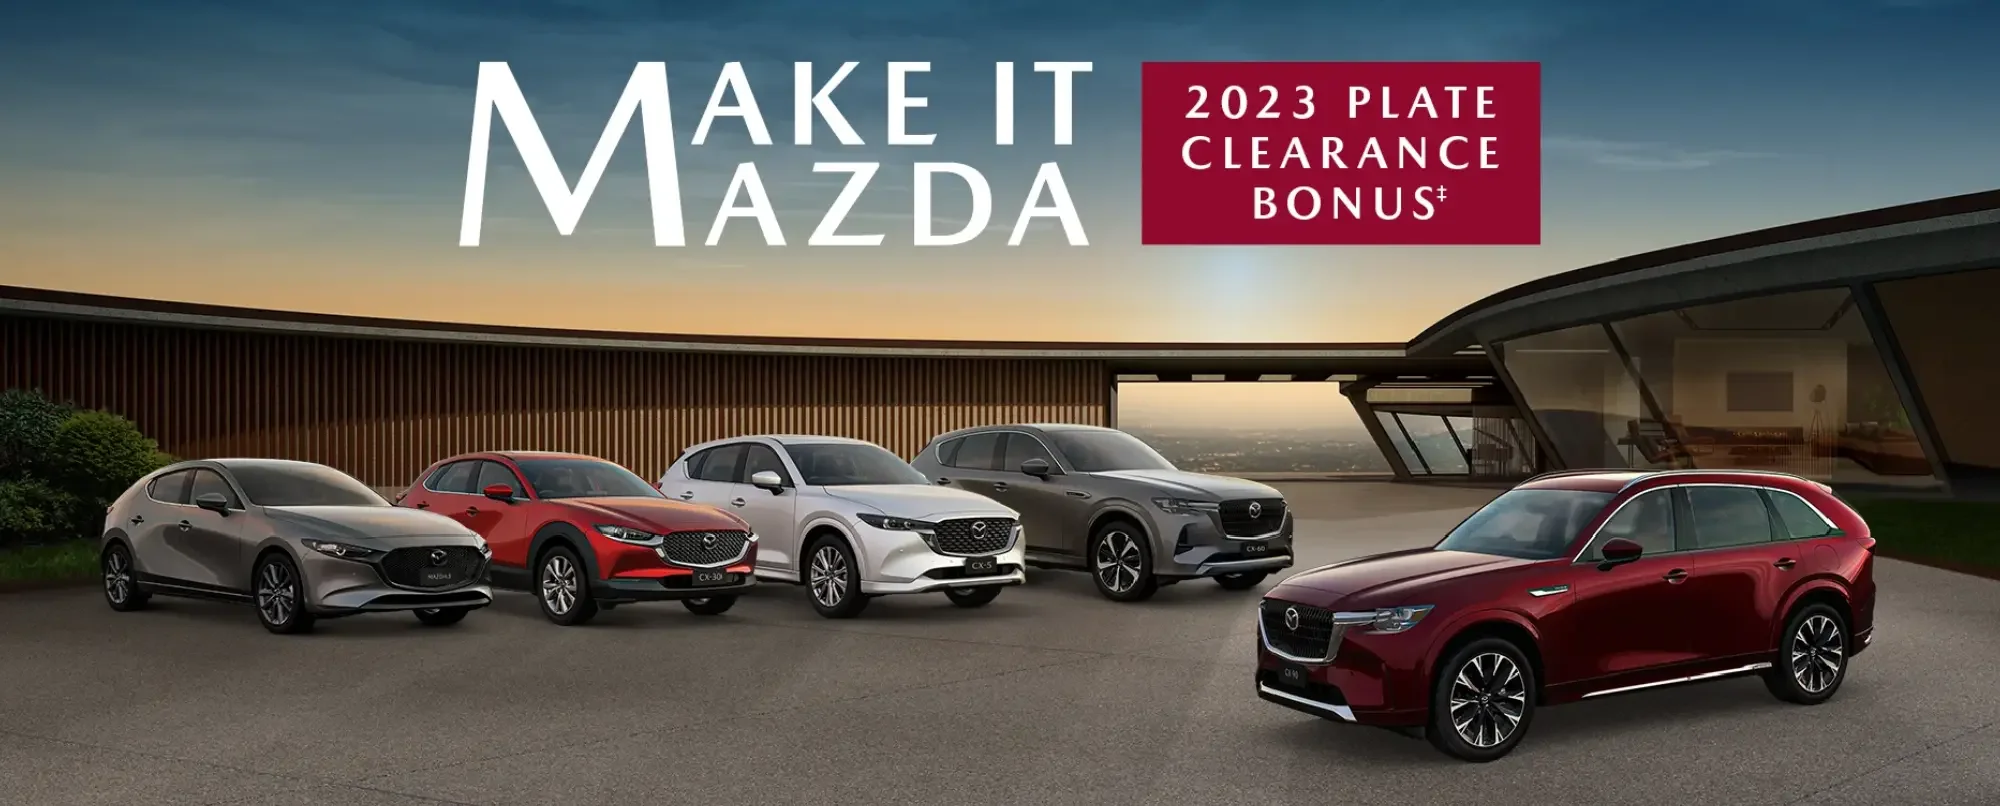 <p>Now’s the perfect time to drive away in your brand new Mazda with stock available across the range.</p>